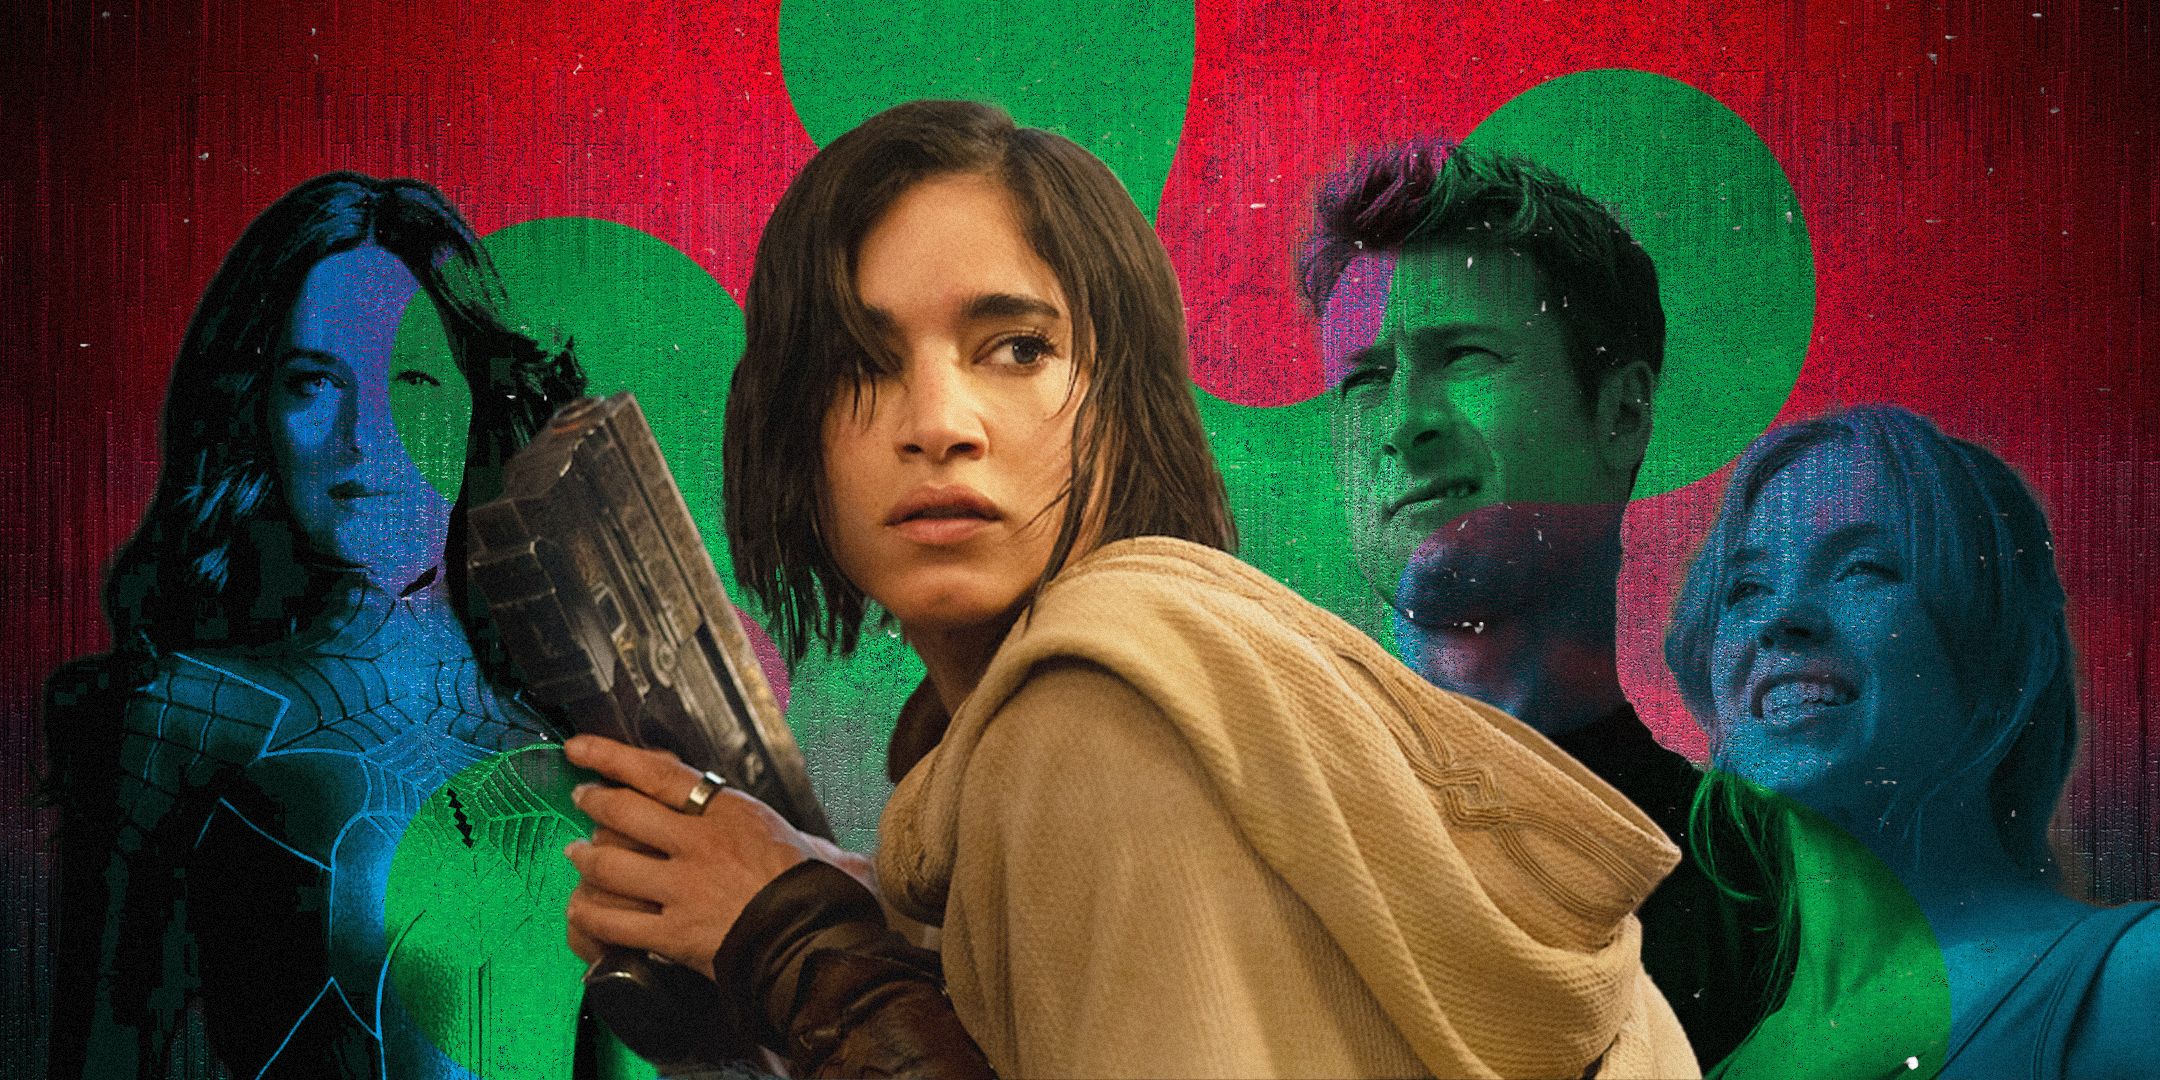 Rotten Tomatoes Has Too Much Power Over Movies